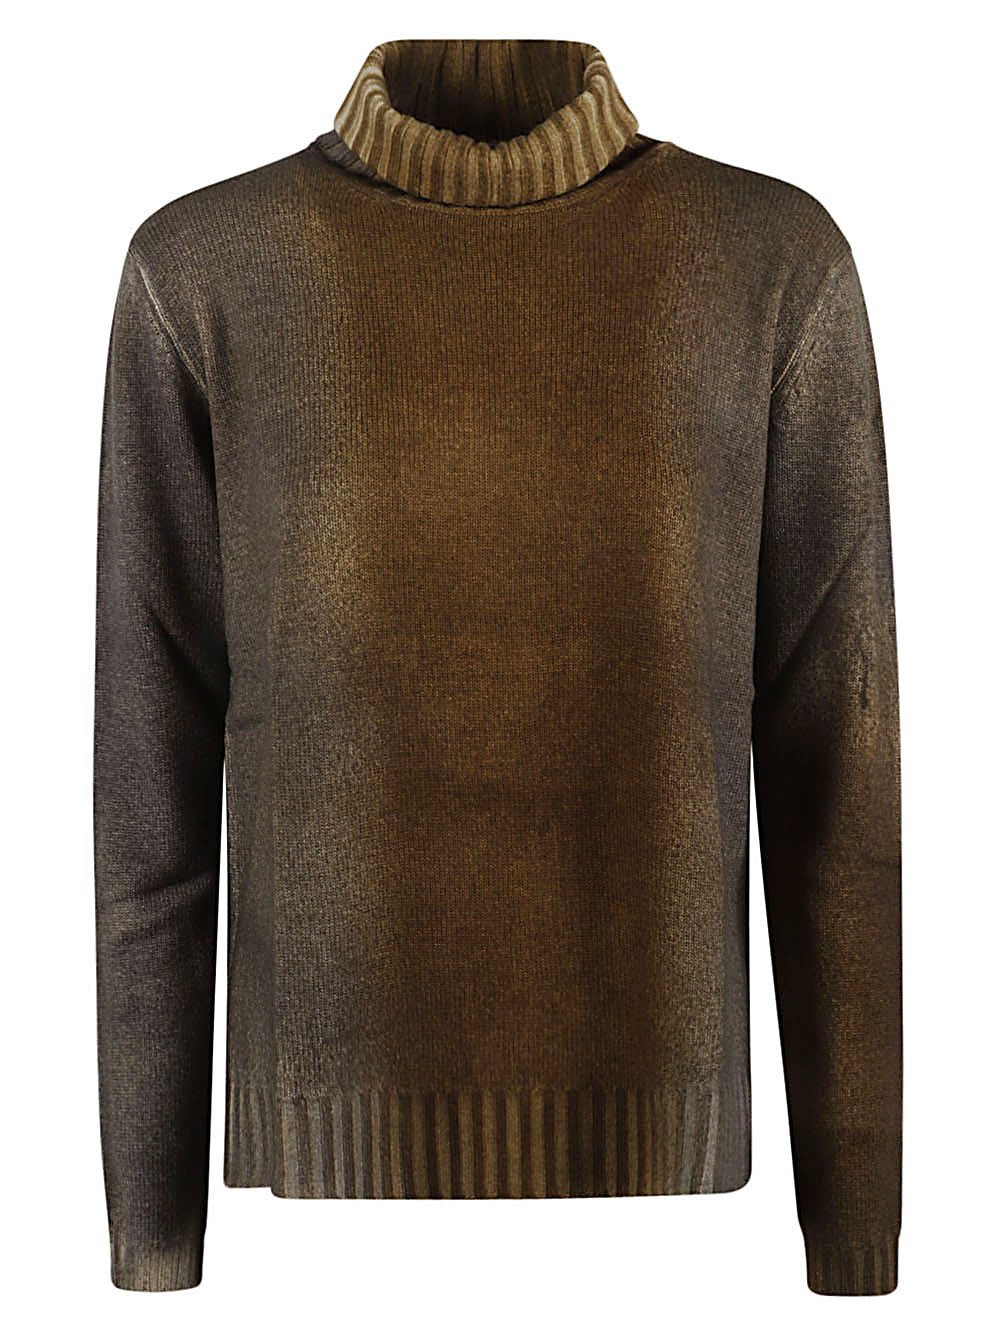 Alessandro Aste ALESSANDRO ASTE- Wool And Cashmere Blend Turtleneck Sweater